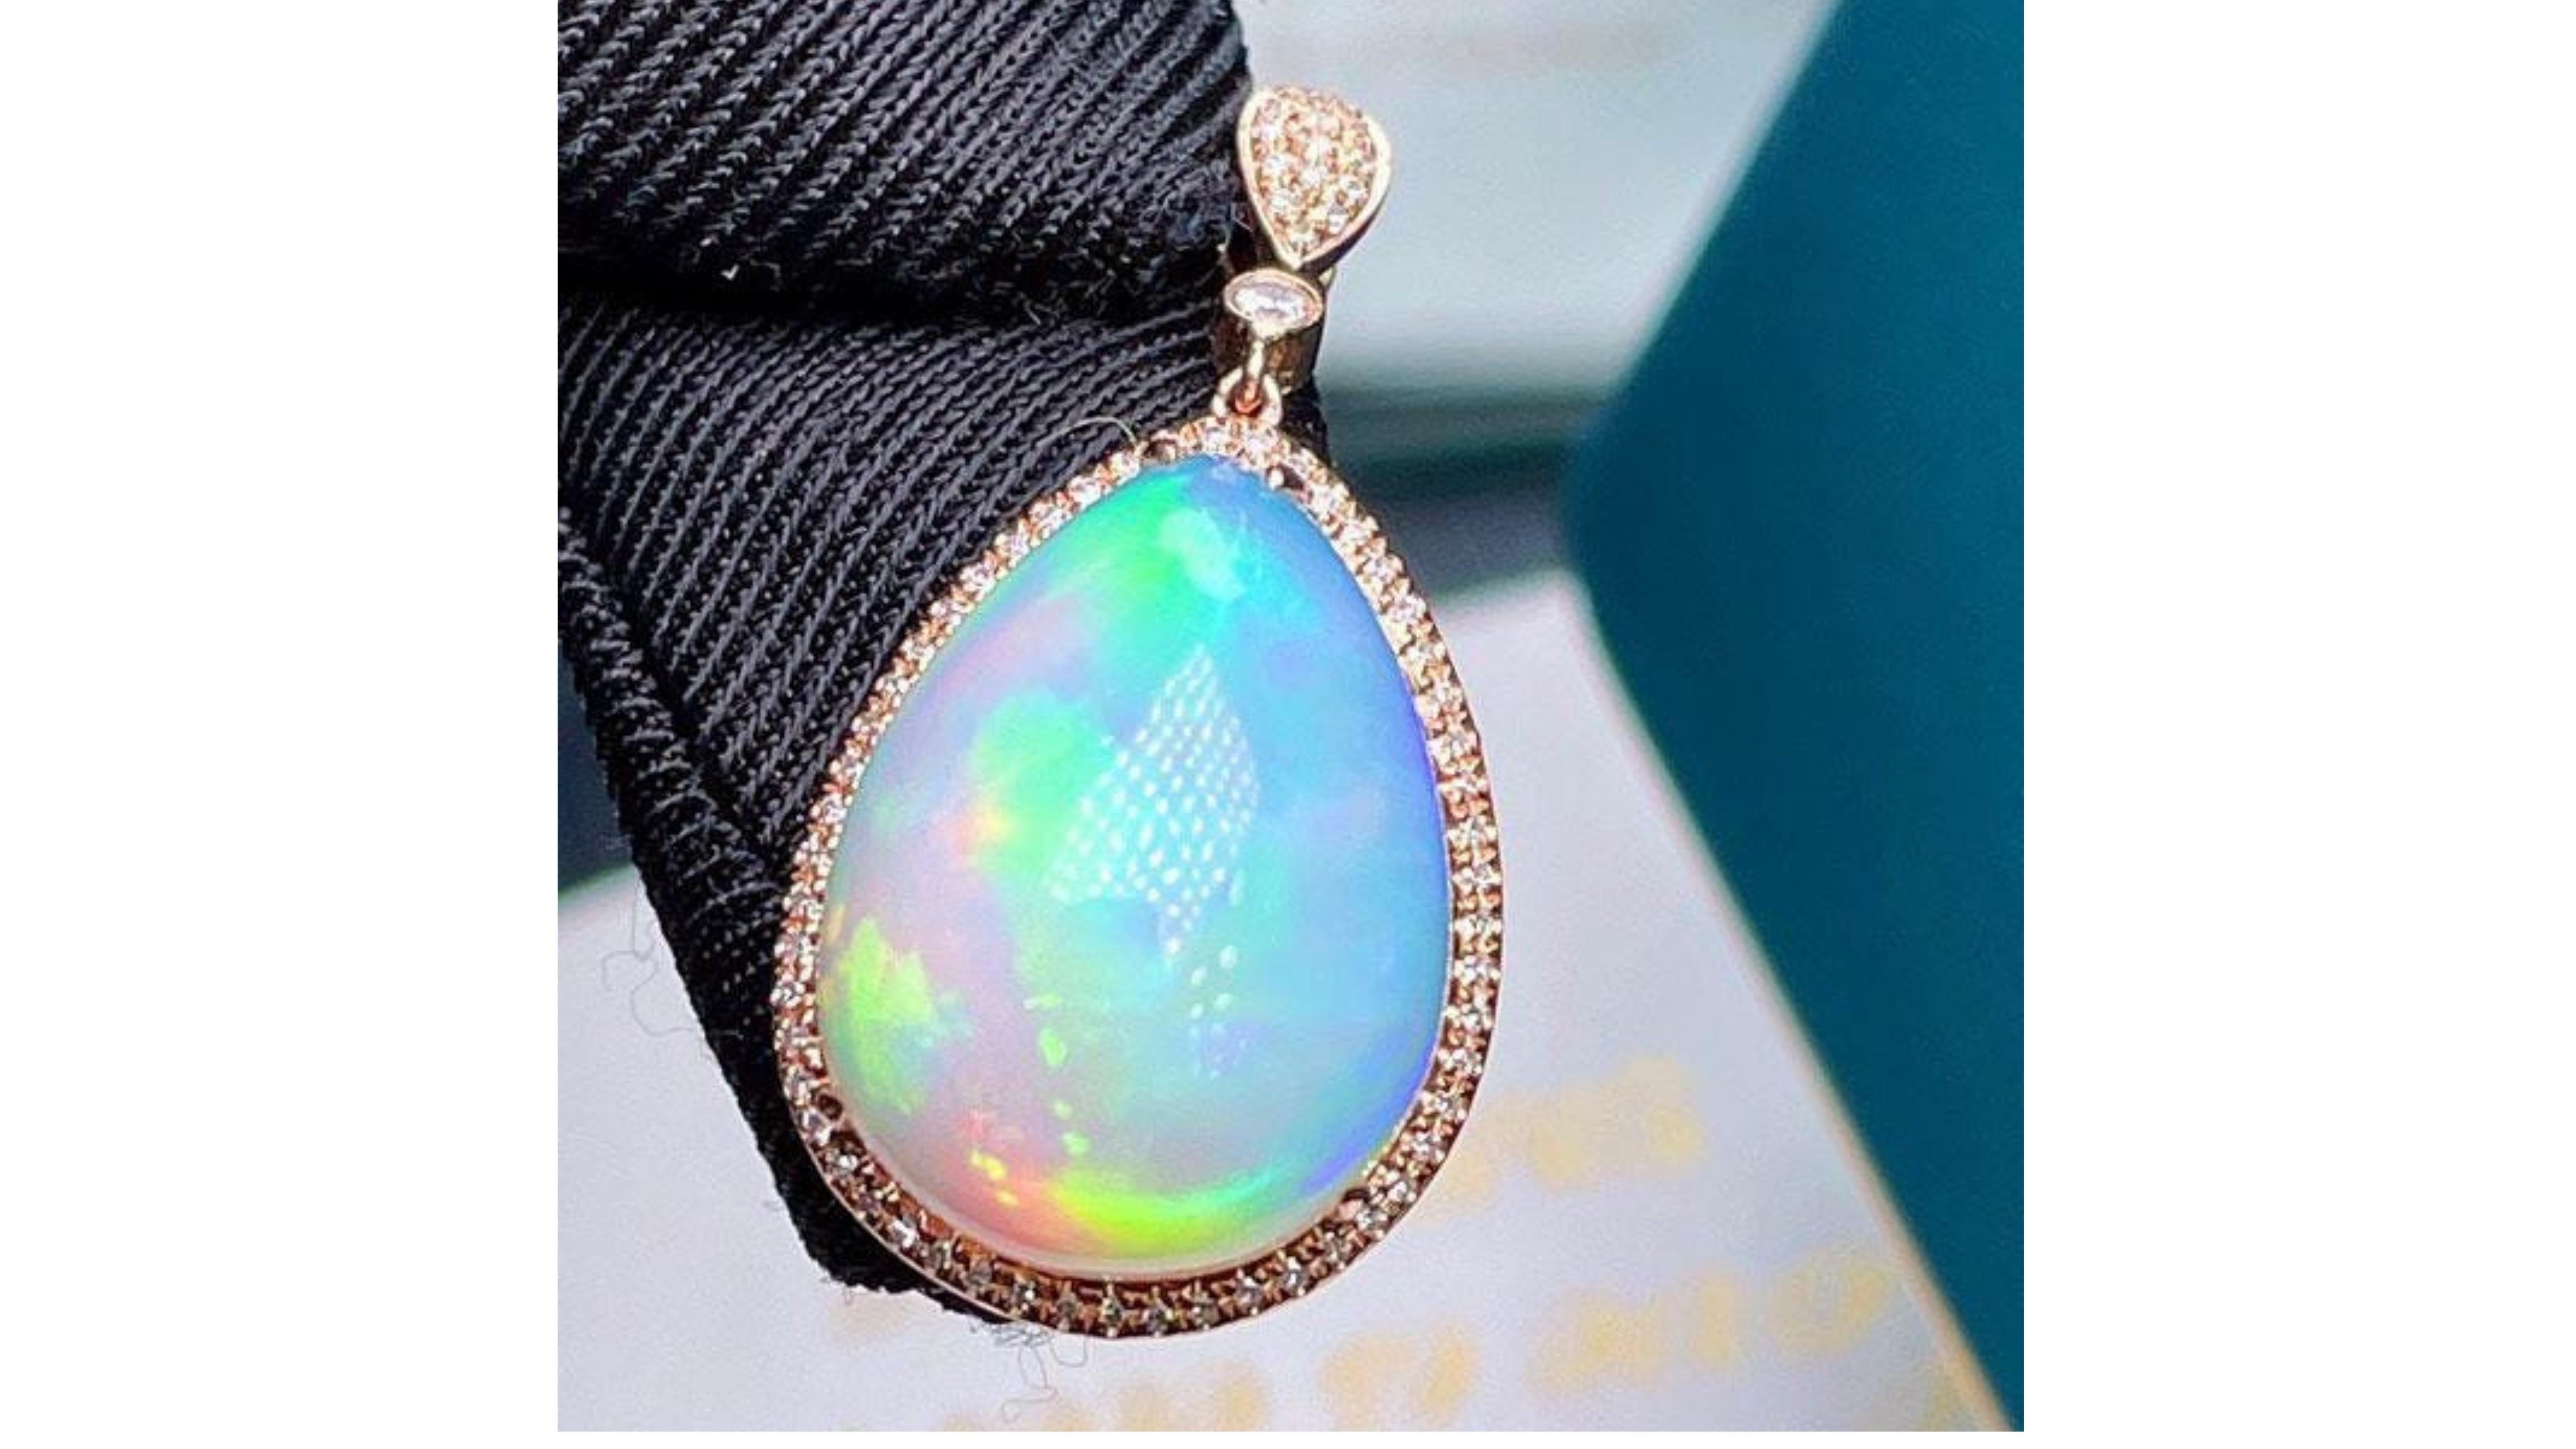 

This Ethiopian Opal shows off Very Bright Colors Blue Yellow Green  Pink Orange and stands out also with  76 diamonds including ones on the bail 

Ethiopian Opal is a new variety of opal discovered in Wollo province of Ethiopia. It is highly